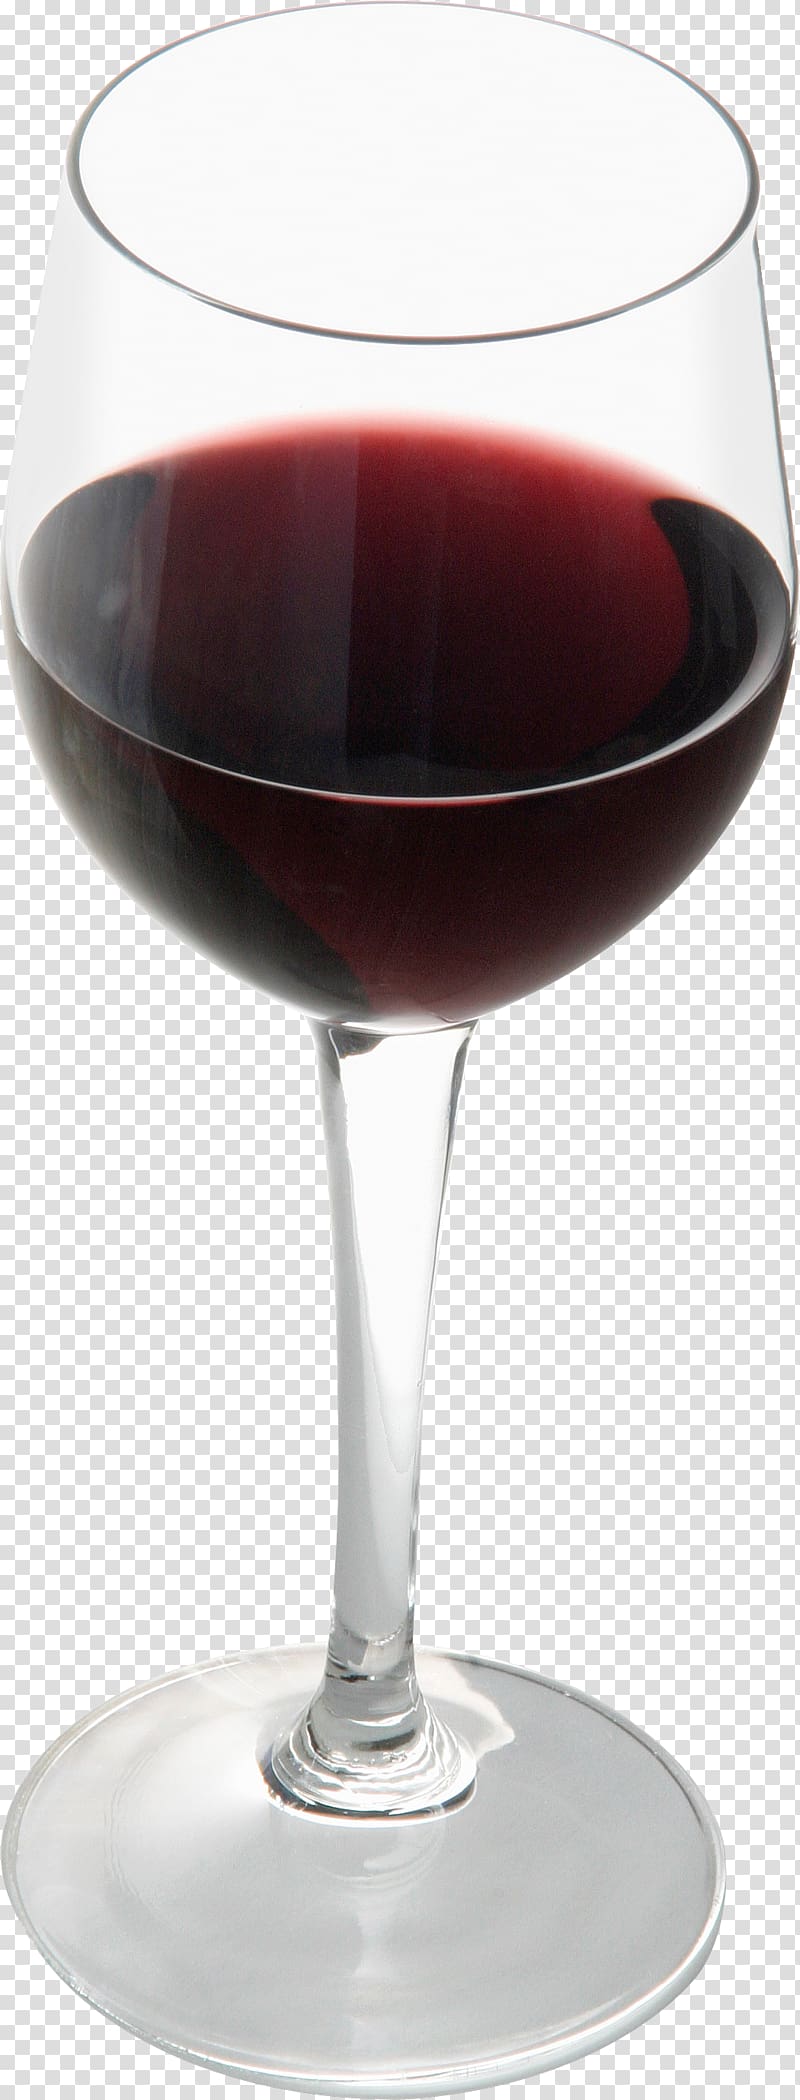 Red Wine The Glass of Wine Champagne Cabernet Sauvignon, Glass transparent background PNG clipart